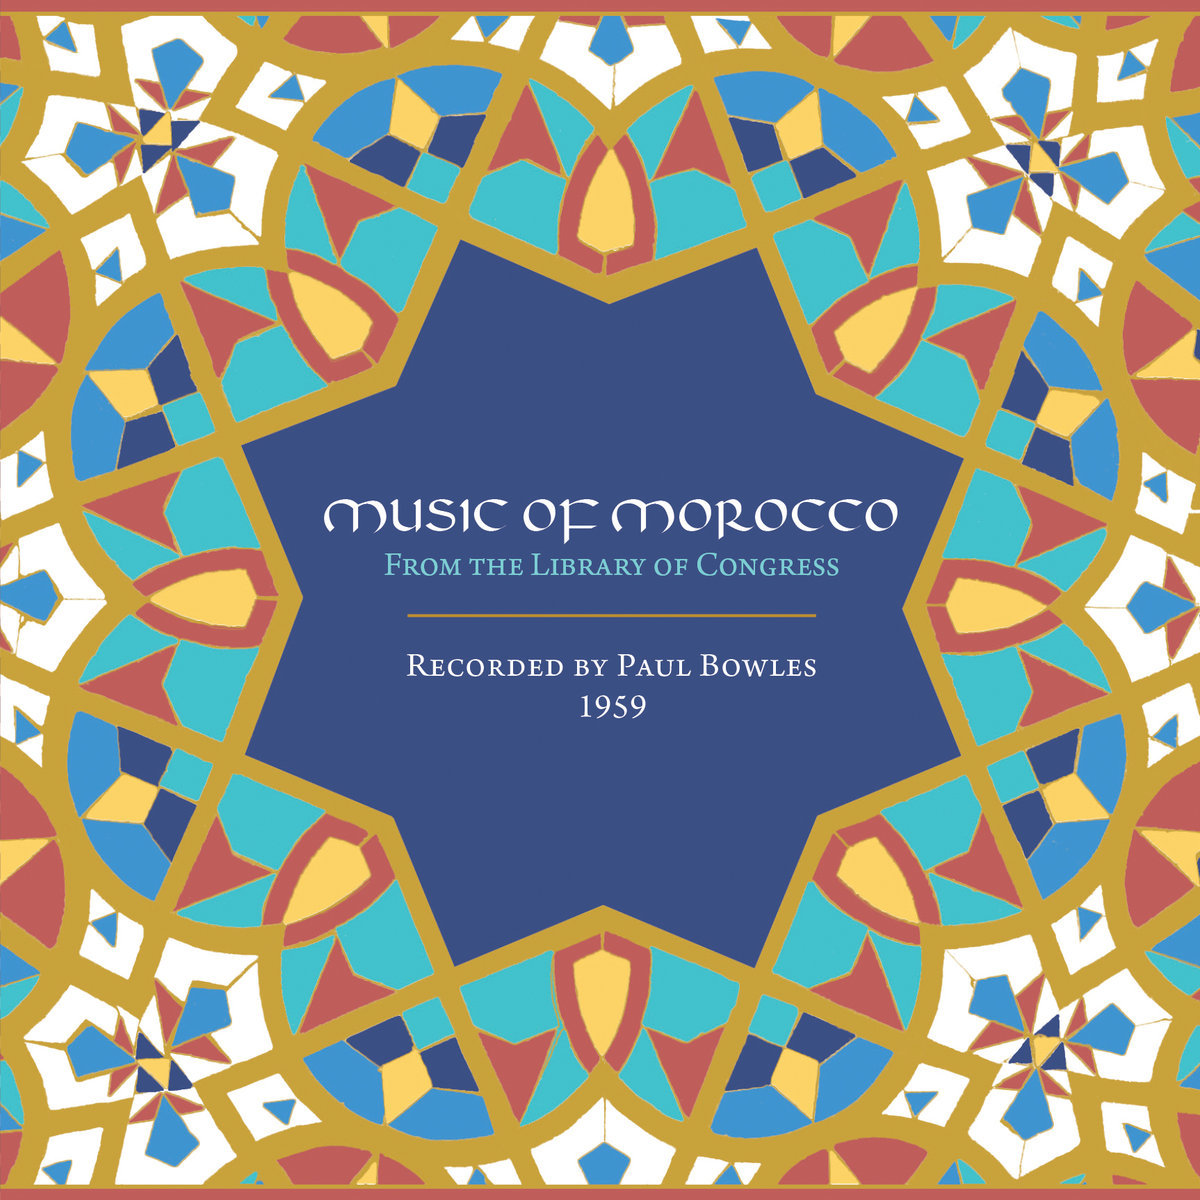 Bandcamp pick of the week - Music of Morocco: Recorded by Paul Bowles, 1959